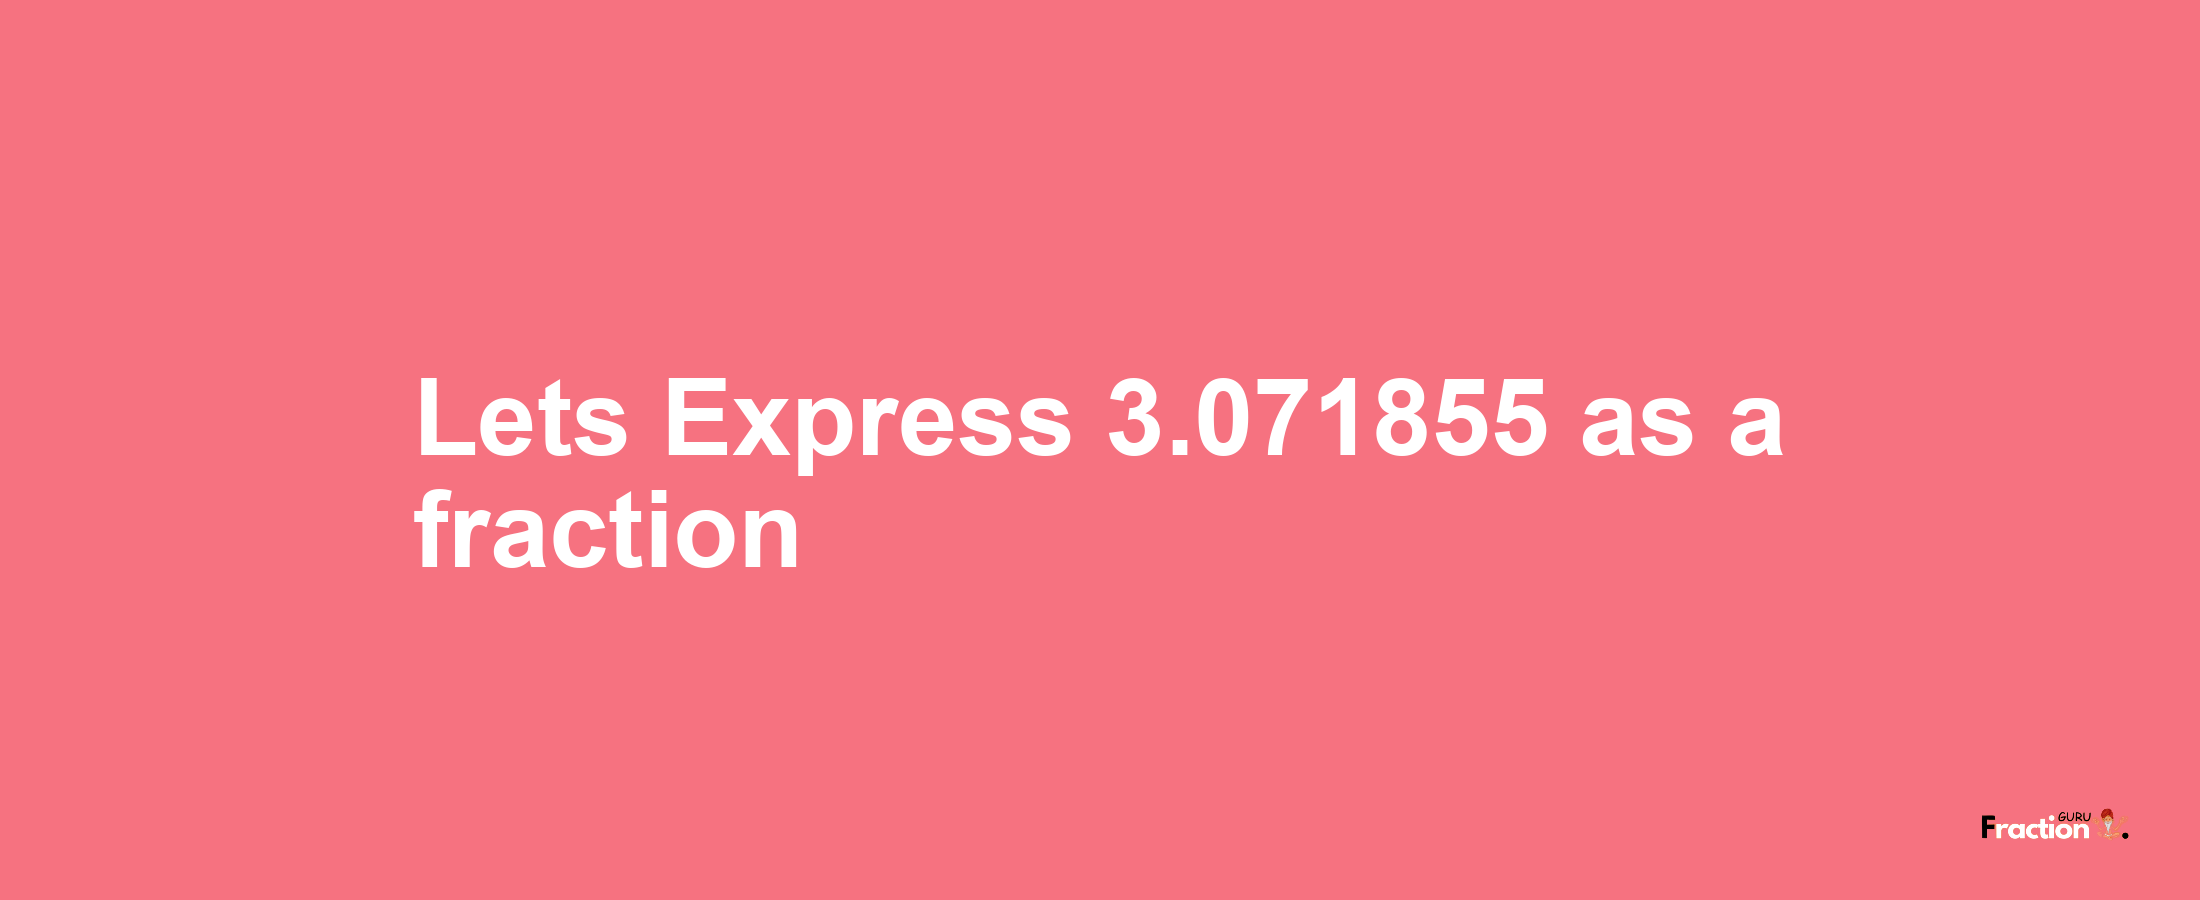 Lets Express 3.071855 as afraction